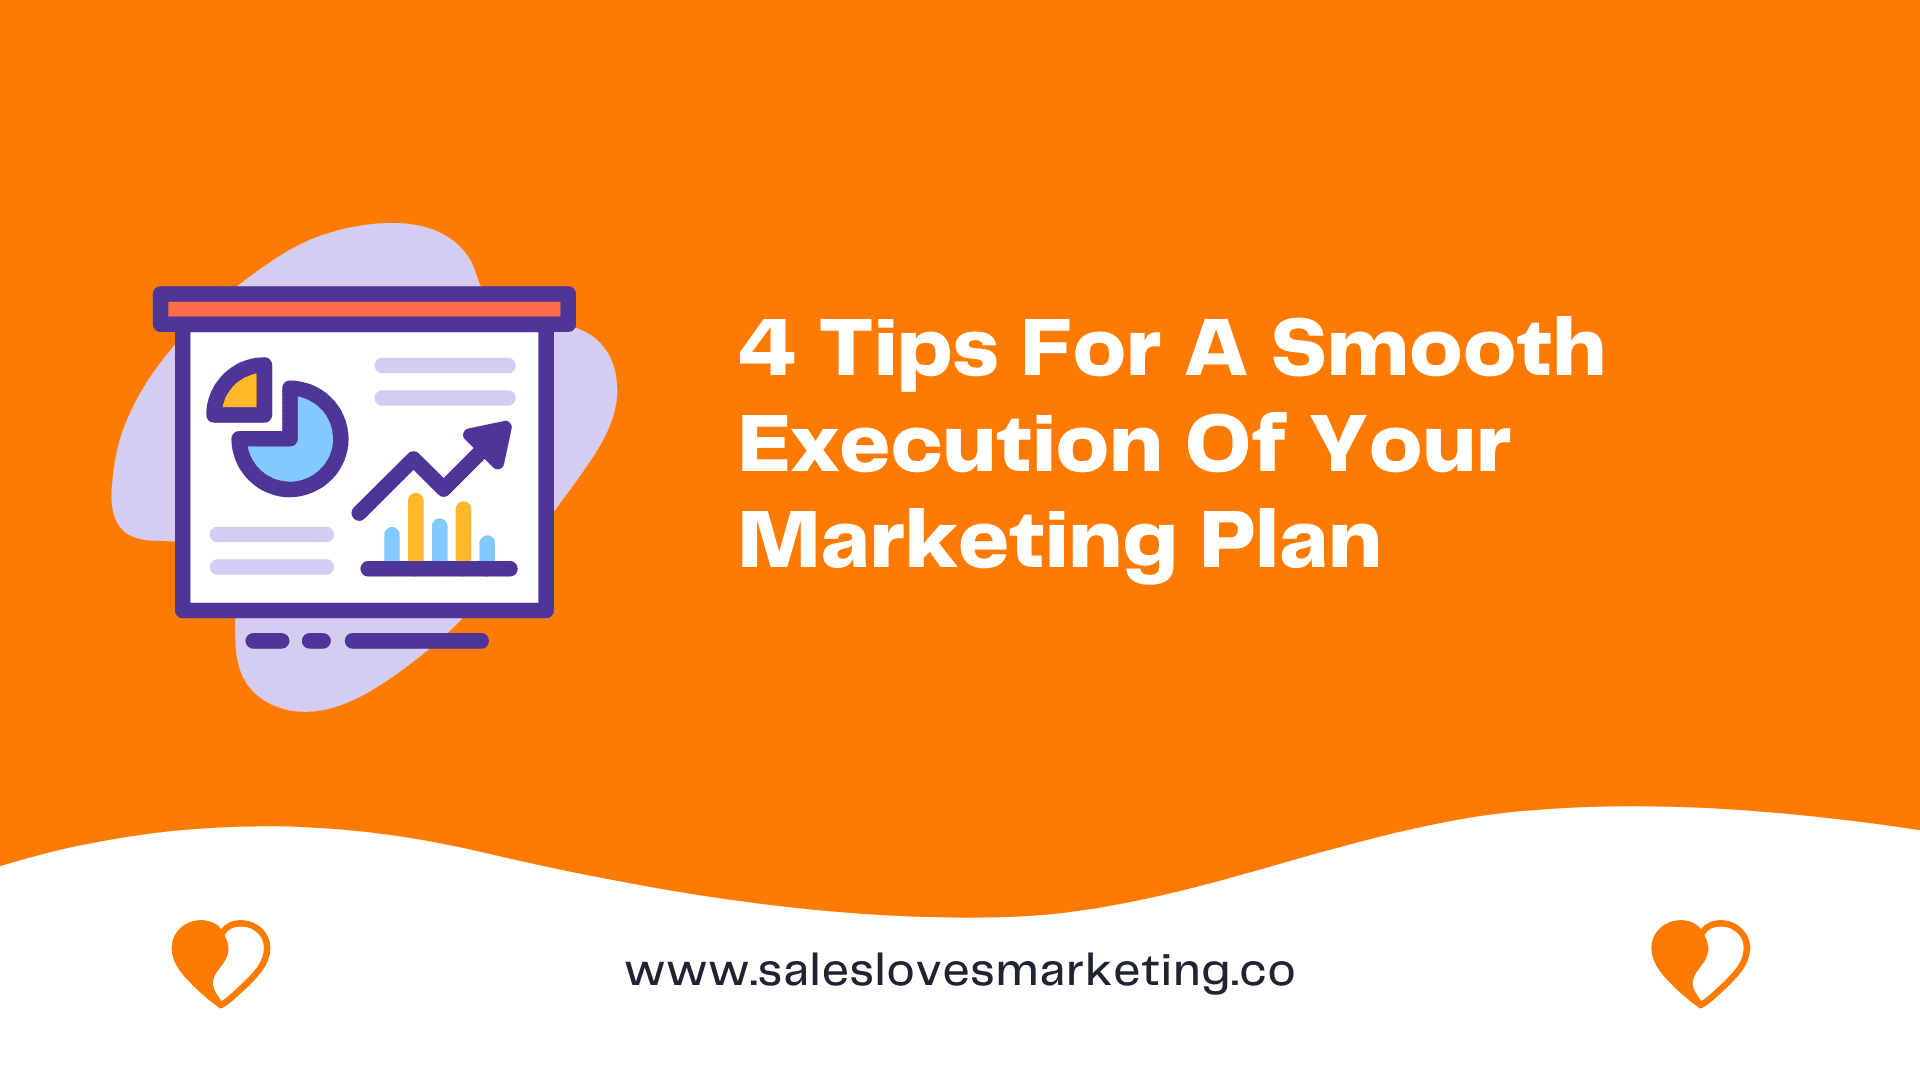 4 Tips For A Smooth Execution Of Your Marketing Plan